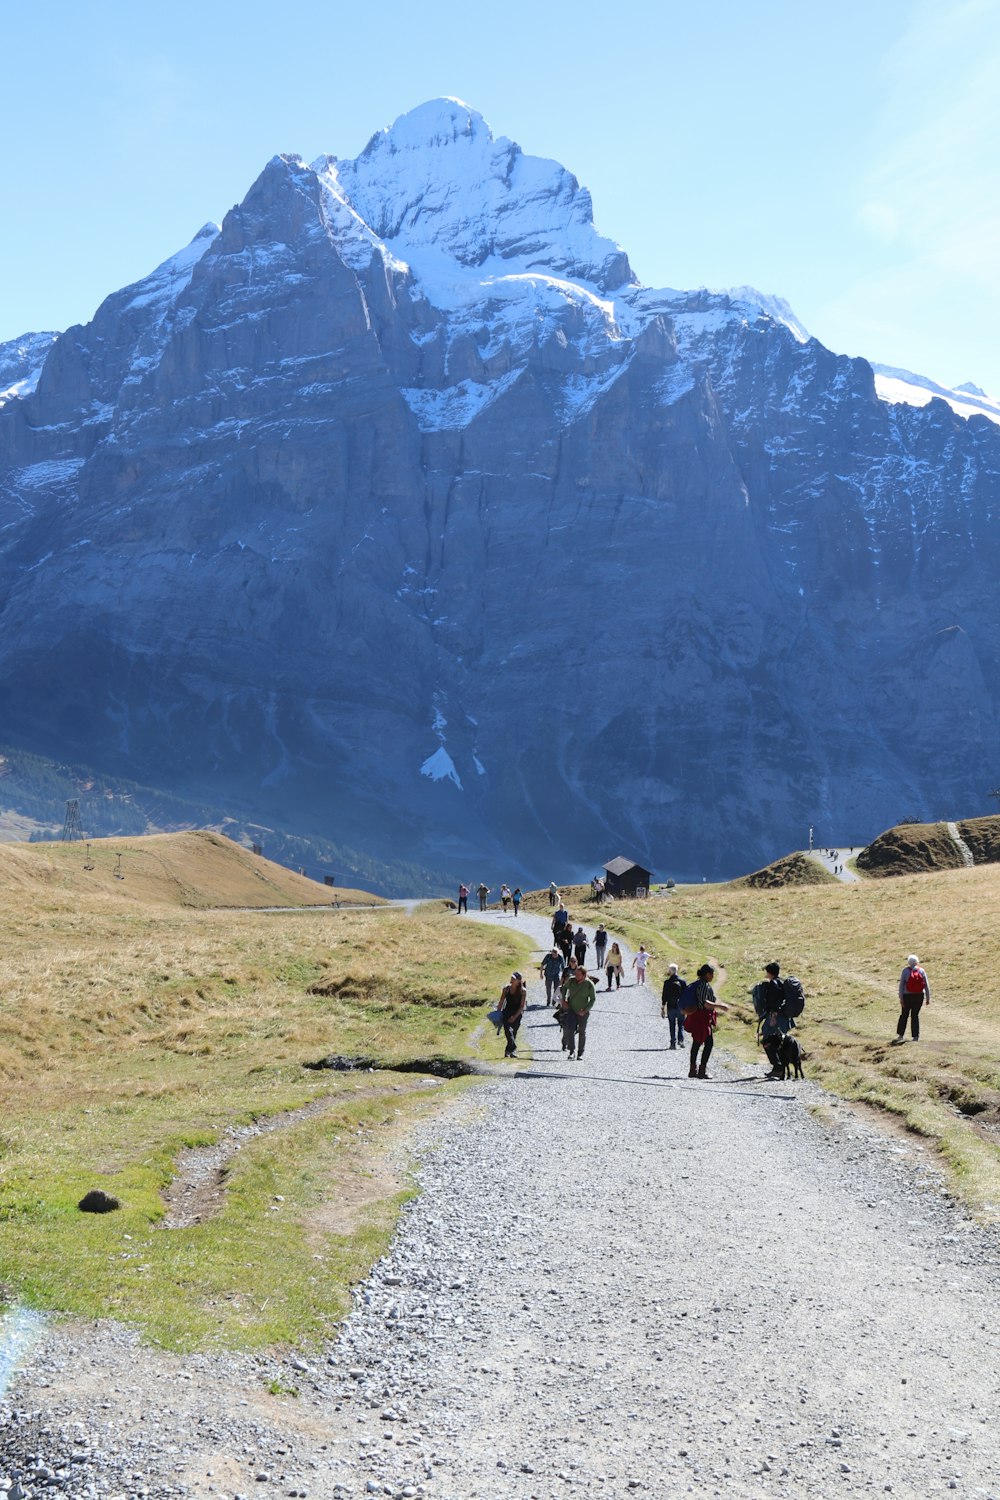 a group of people walking on a dirt road in front of a large mountain